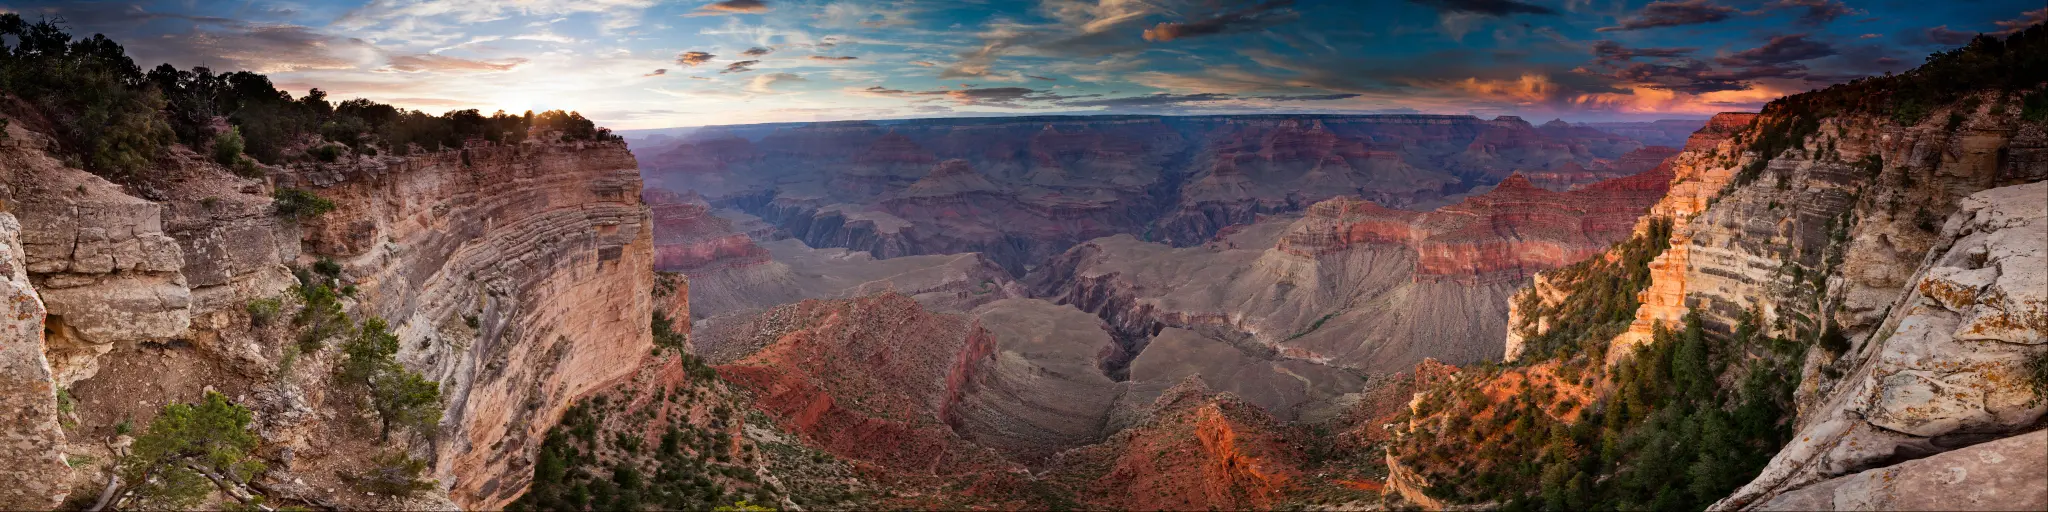 View  down into the Grand Canyon at sunset.